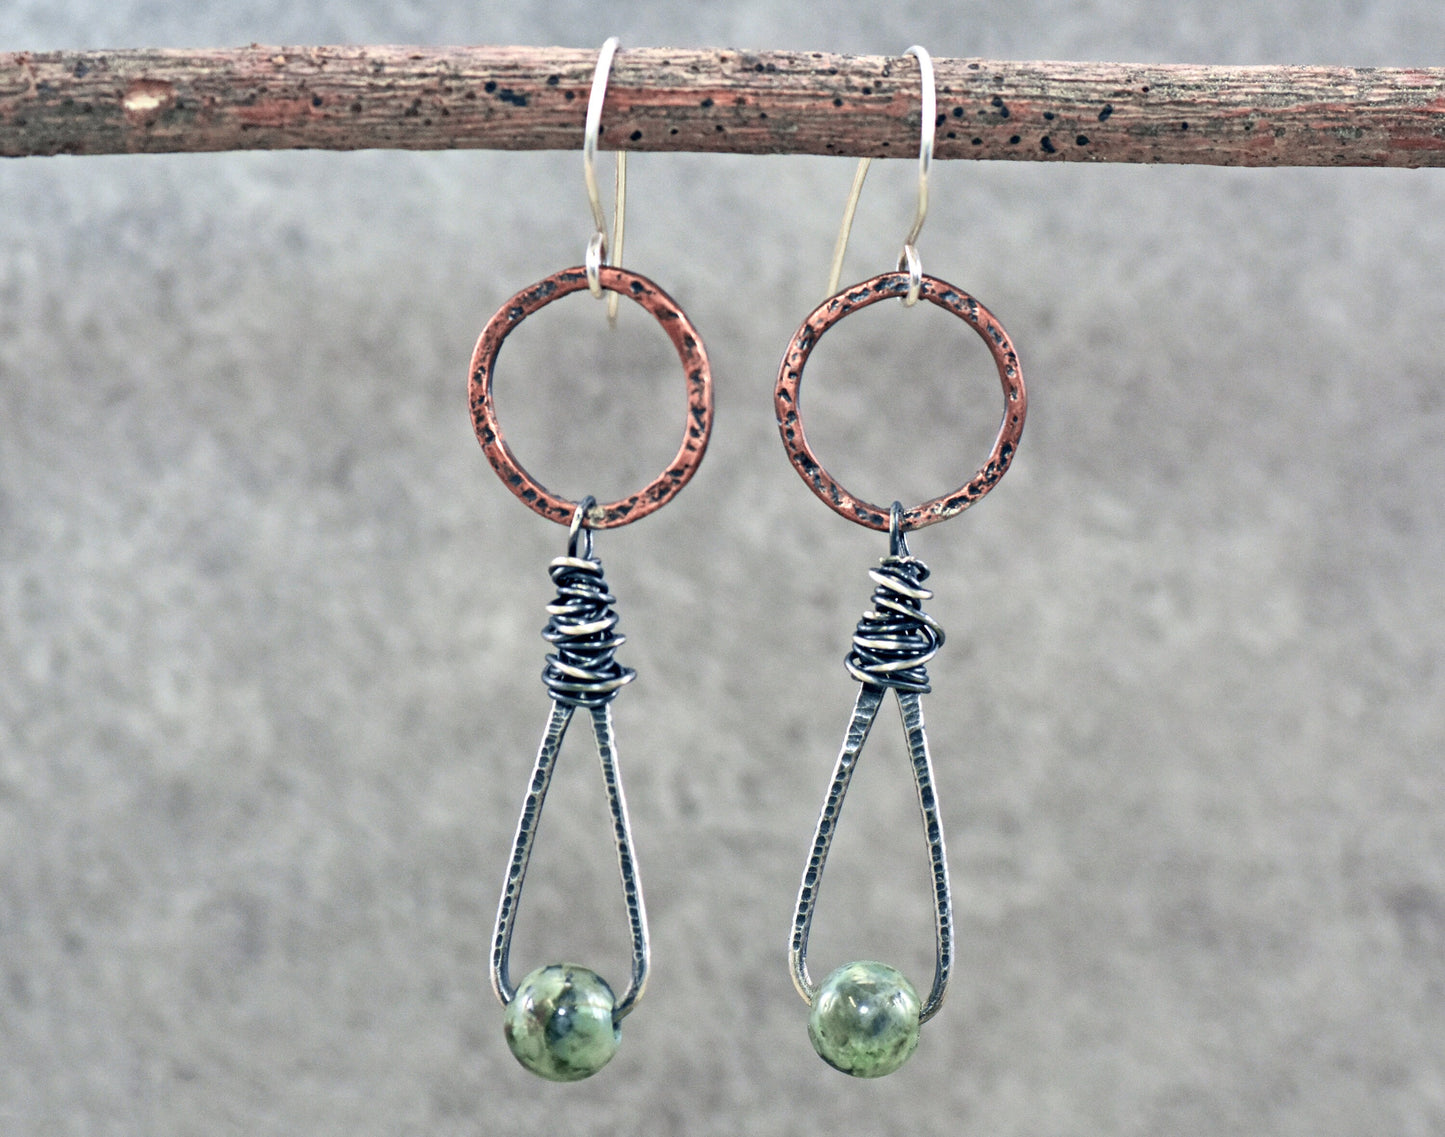 African Turquoise Jasper Earrings, Unique Mixed Metal Dangles, Light Green Gemstone Jewelry, Copper and Sterling Silver